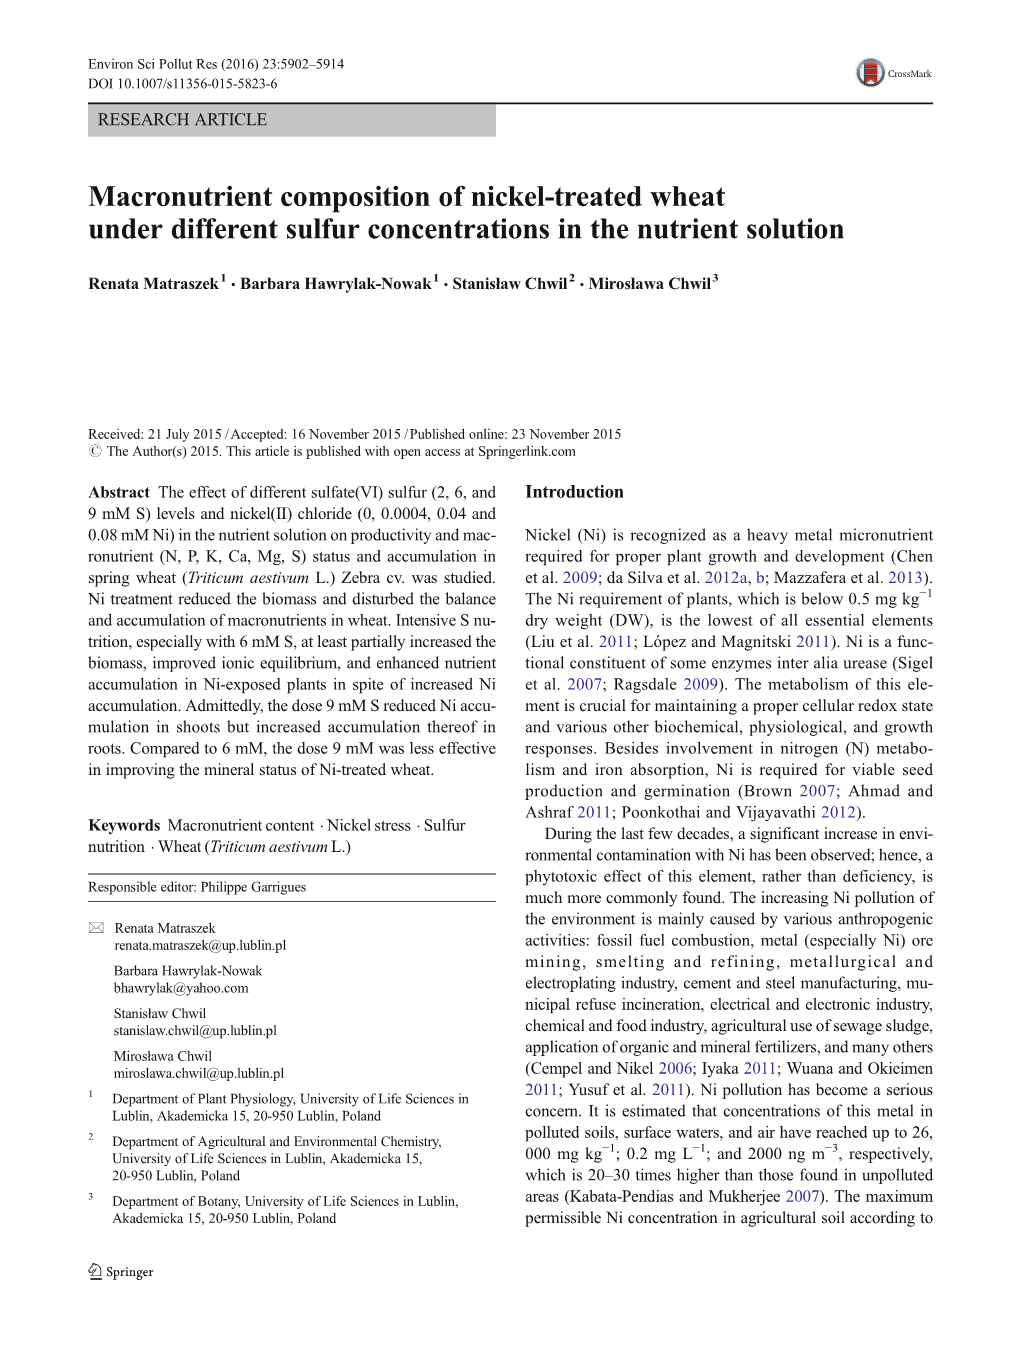 Macronutrient Composition of Nickel-Treated Wheat Under Different Sulfur Concentrations in the Nutrient Solution